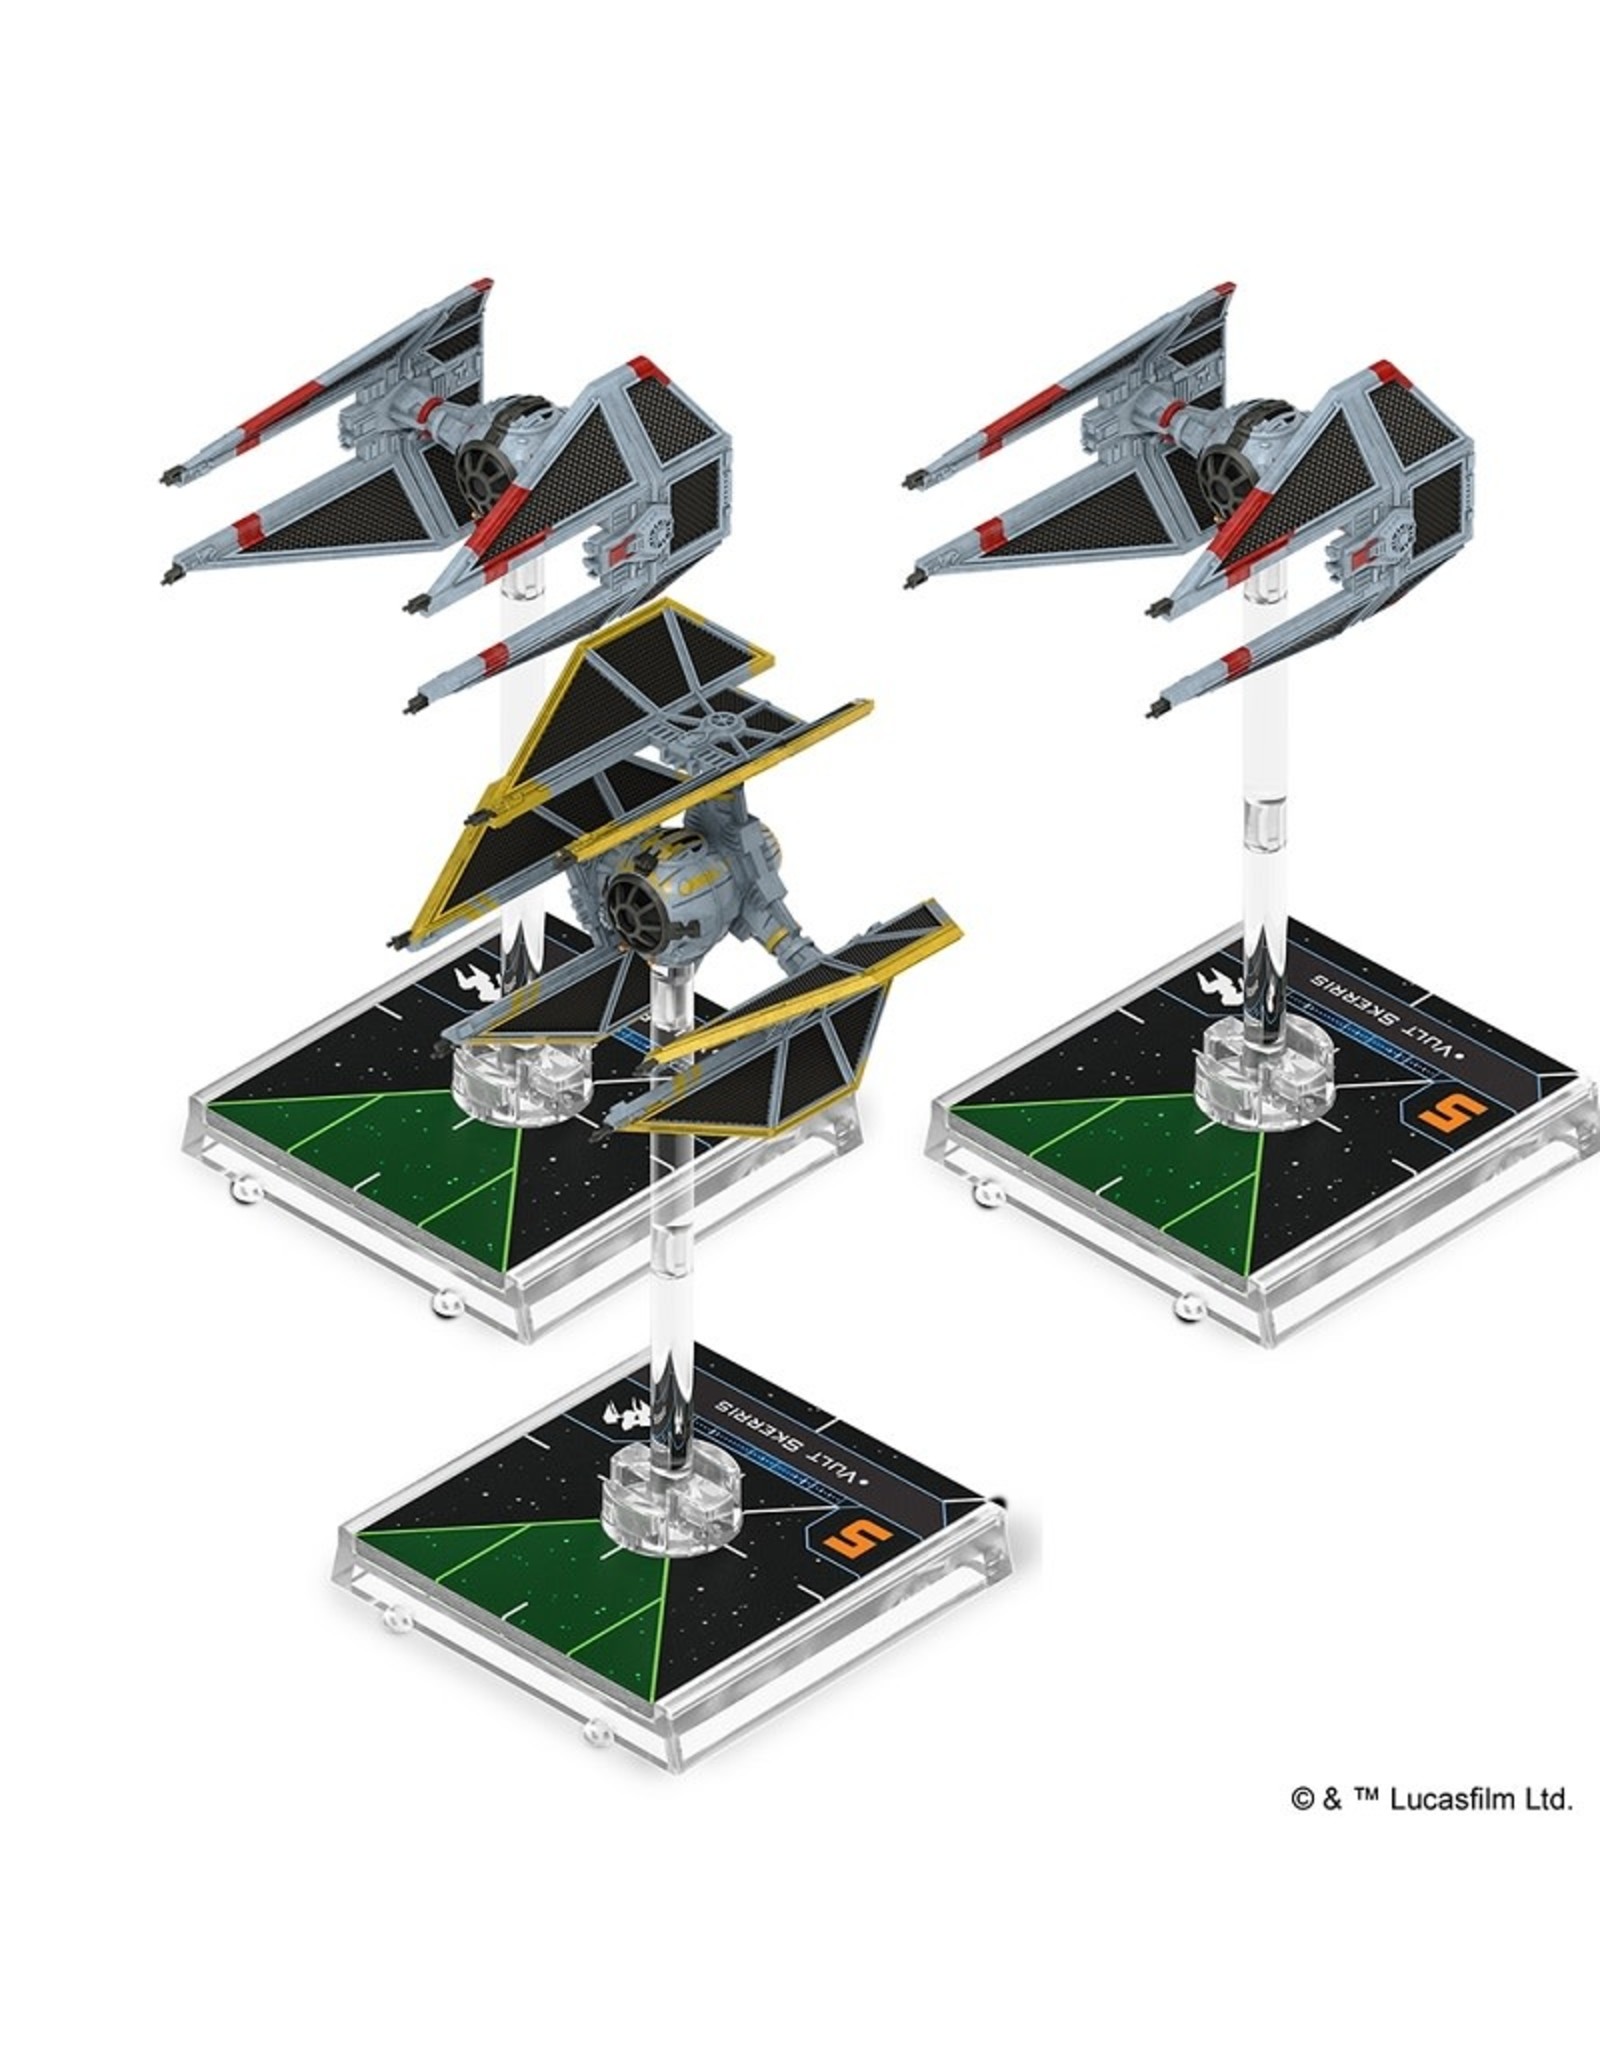 Atomic Mass Games (S/O) Star Wars X-Wing: Skystrike Academy Squadron - 2nd Edition